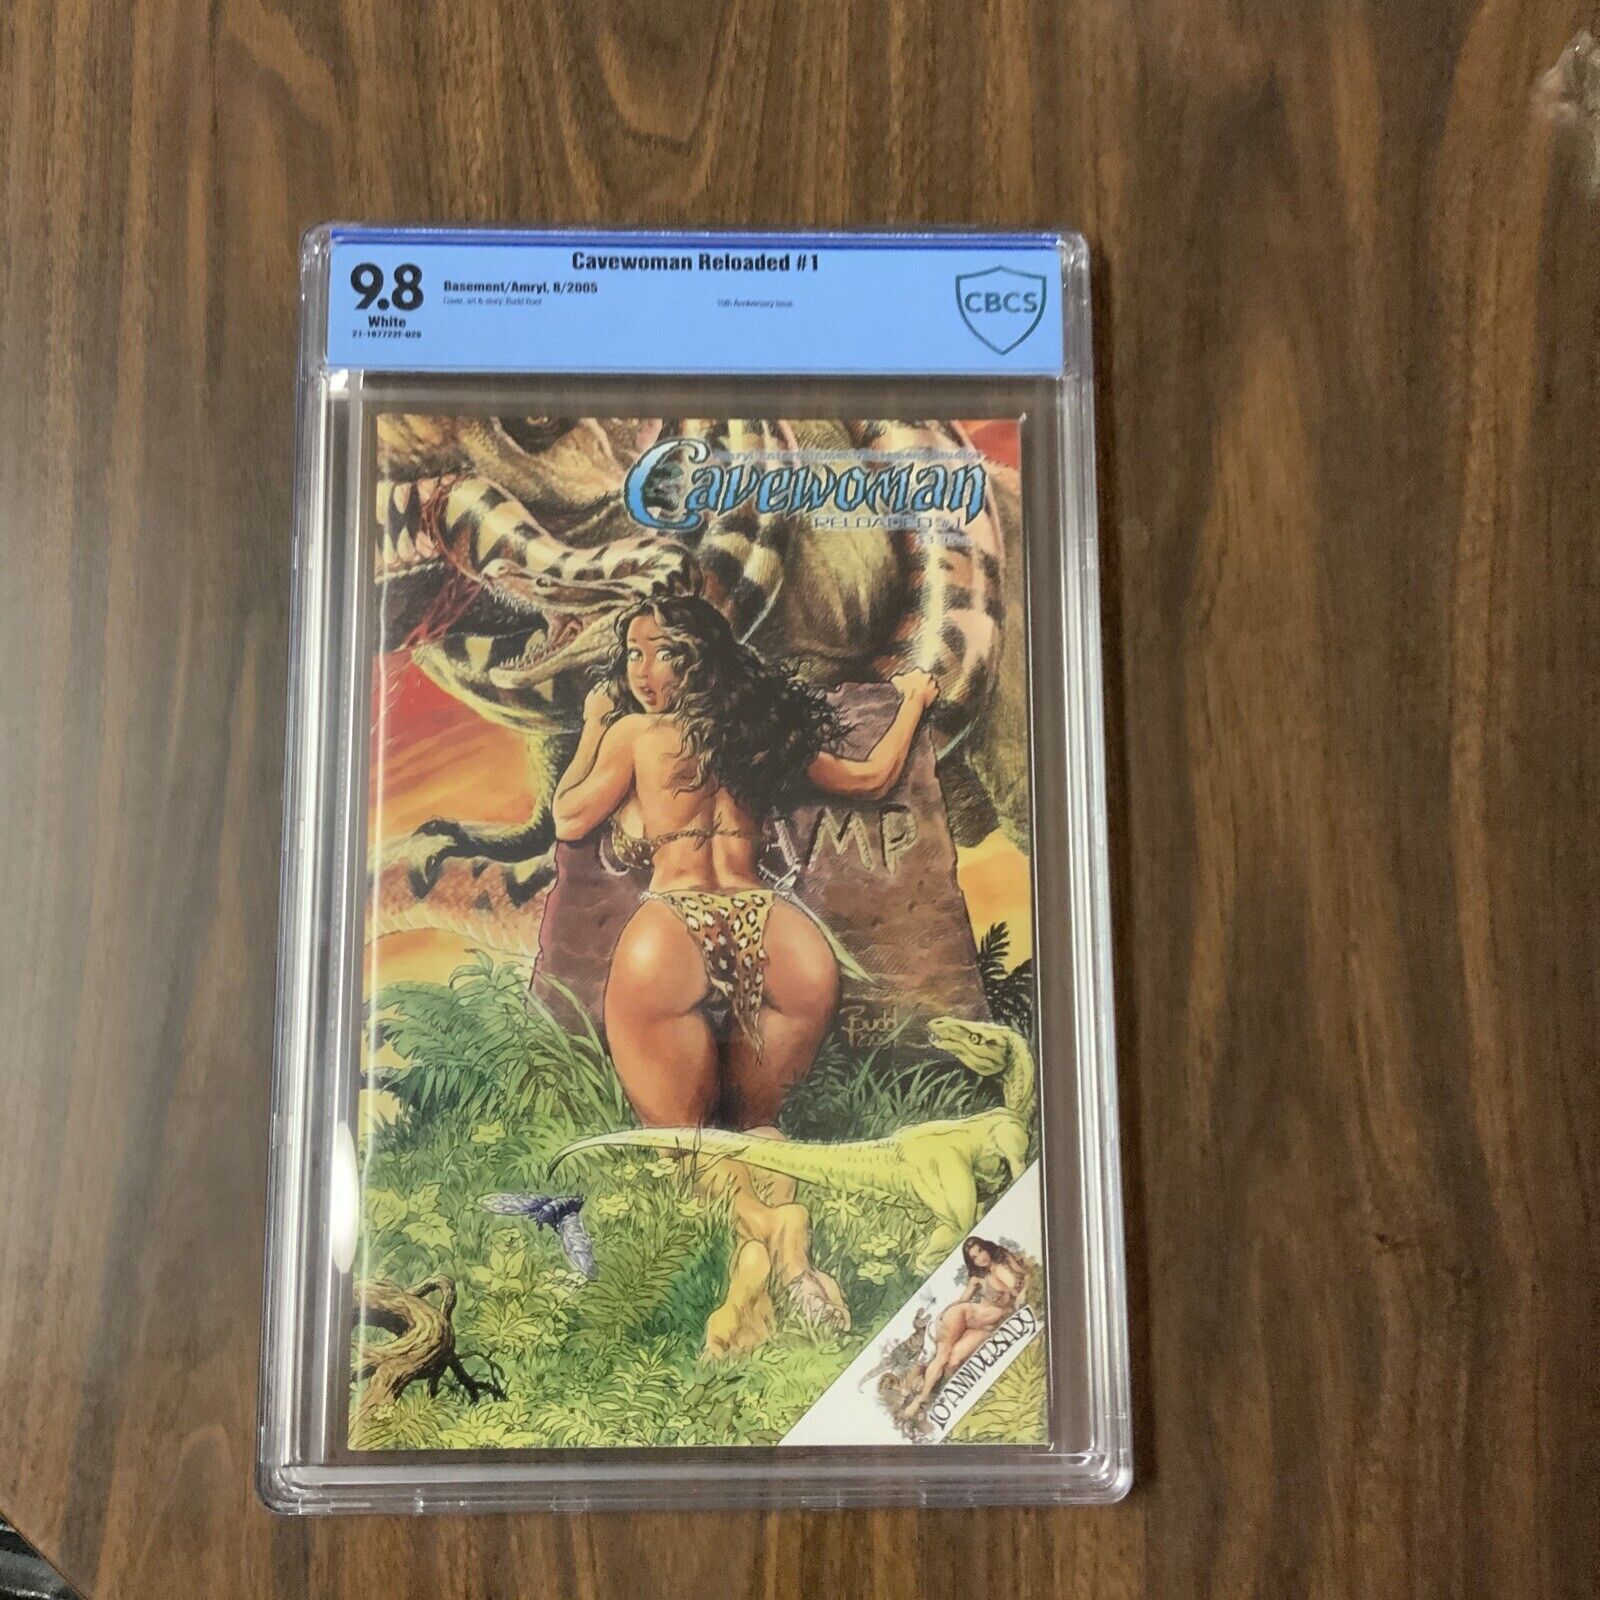 Cavewoman: Reloaded # 1 CBCS 9.8 Rare 10th Anniversary Issue Only One On eBay